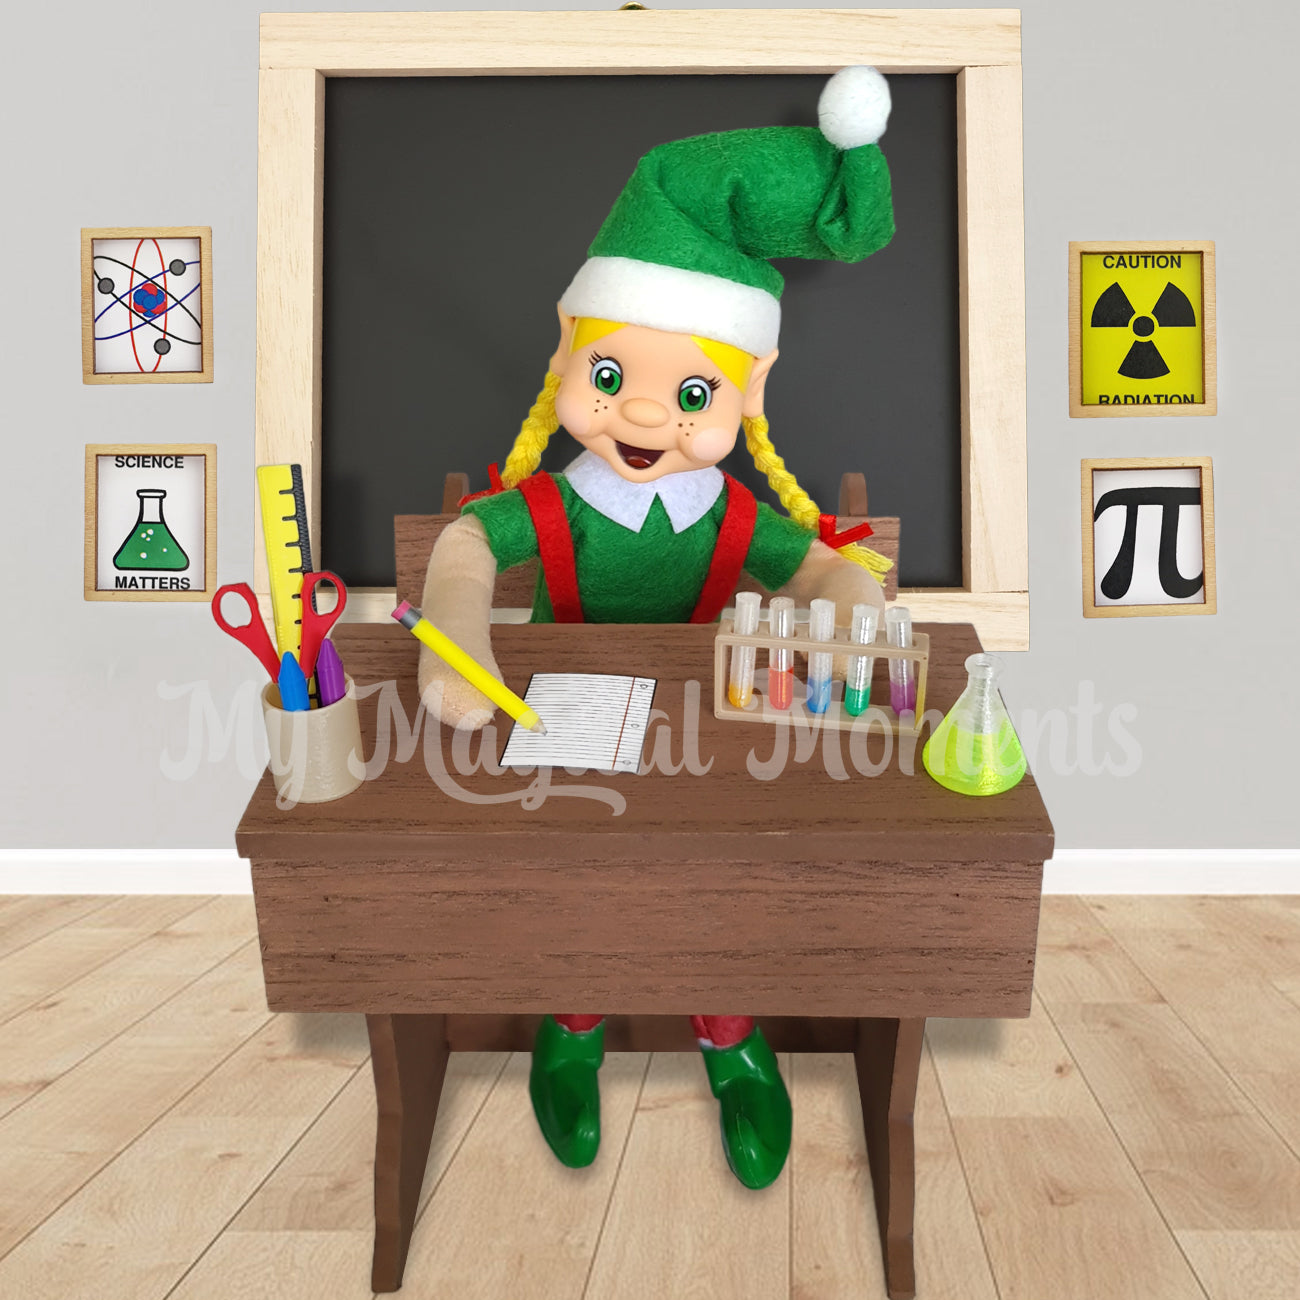 Blonde hair elf sitting at a classroom desk and writing notes. With a chemistry and stationery on desk. Chalkboard is behind